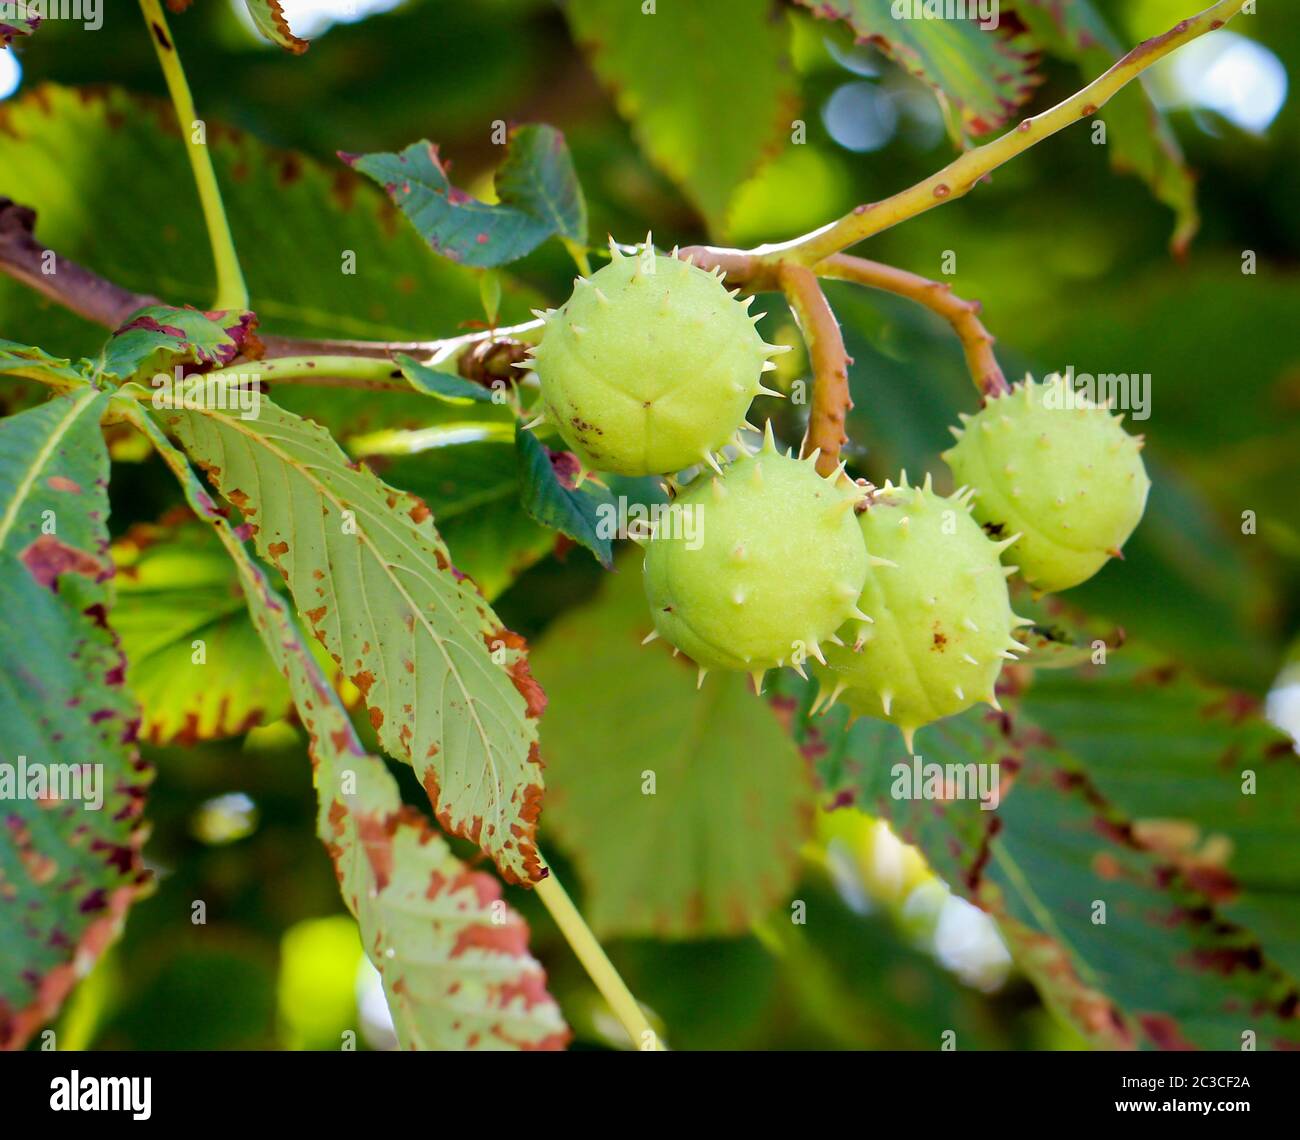 Chestnuts growing on the tree. Leaves of a chestnut tree. Stock Photo